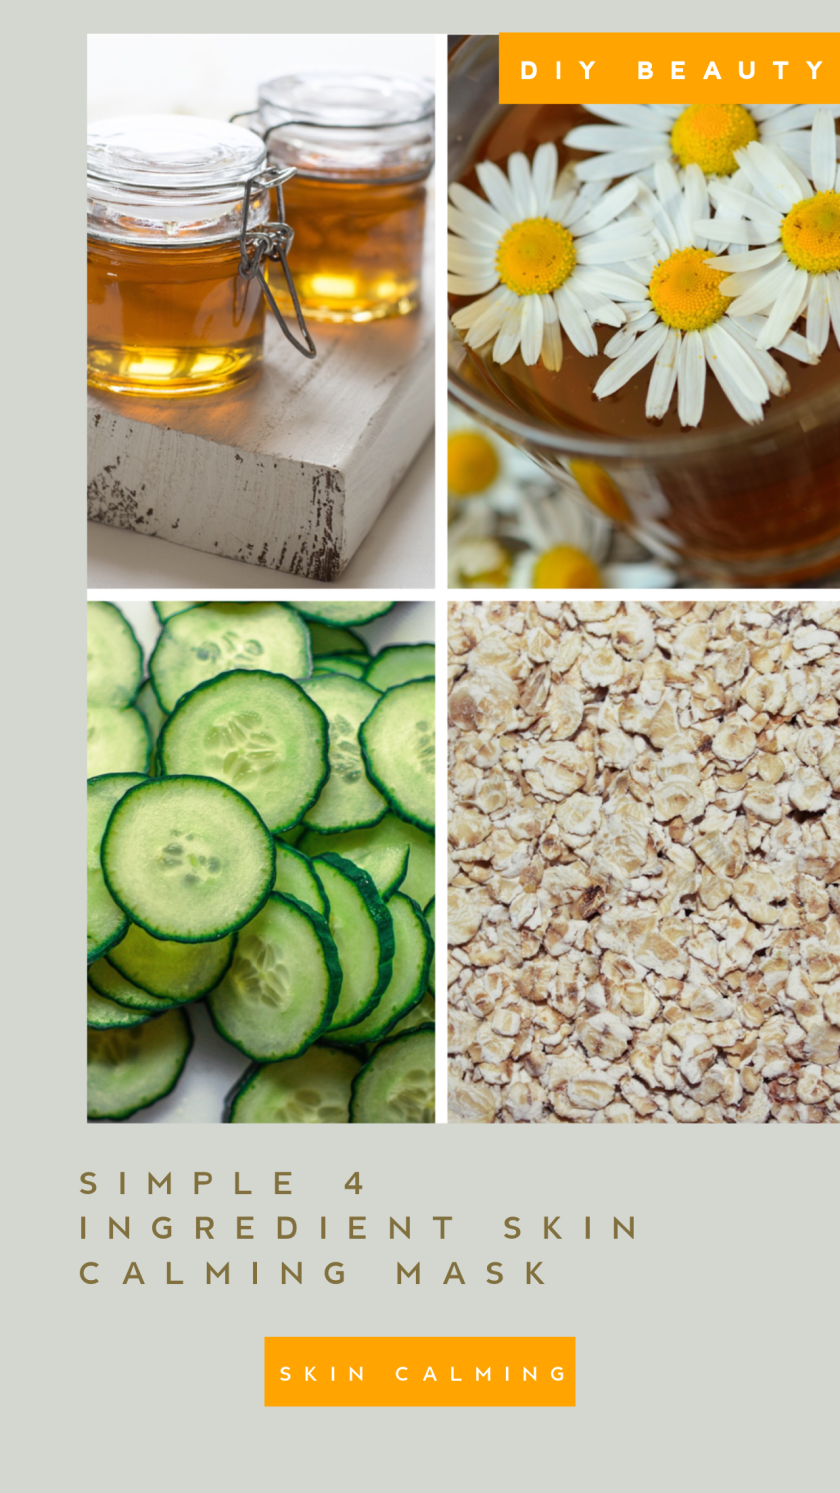 Cucumber and Chamomile SIMPLE 4 INGREDIENT SKIN CALMING MASK